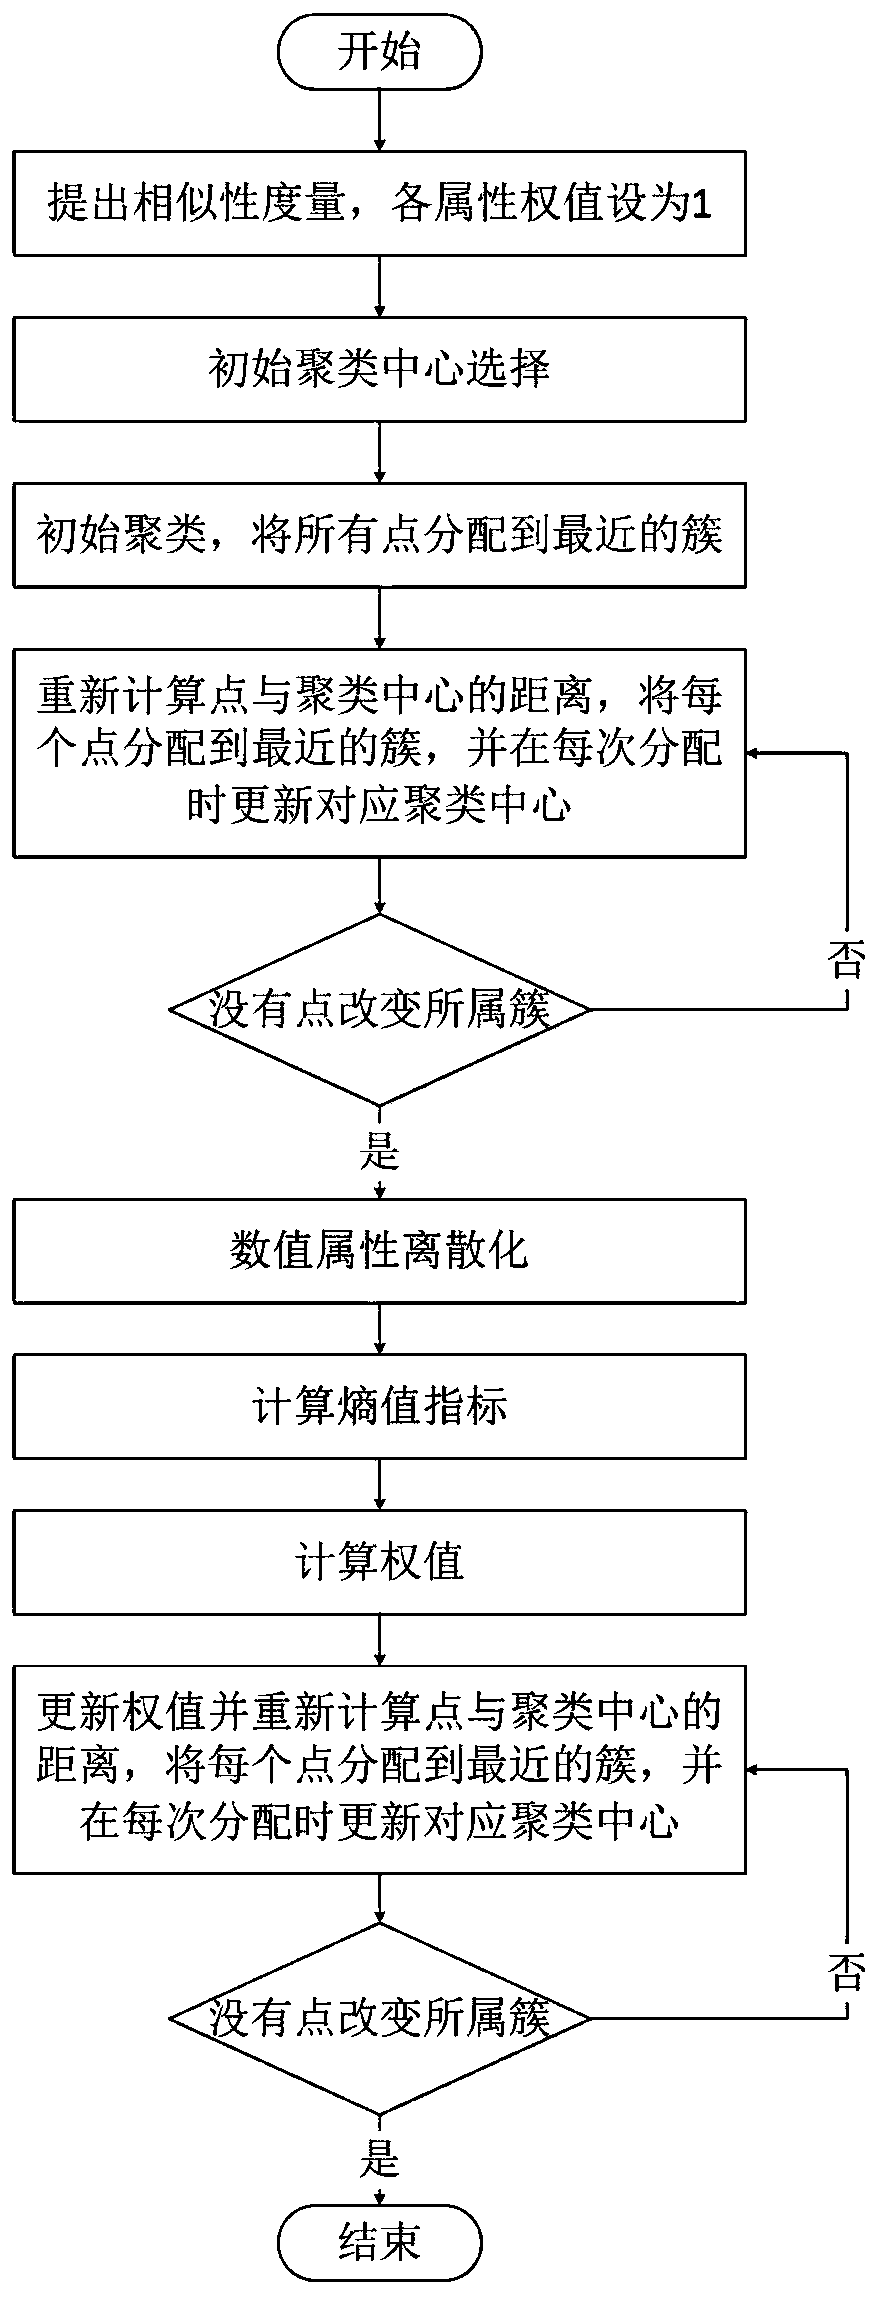 Data clustering method for abnormal detection system, and wireless communication network terminal